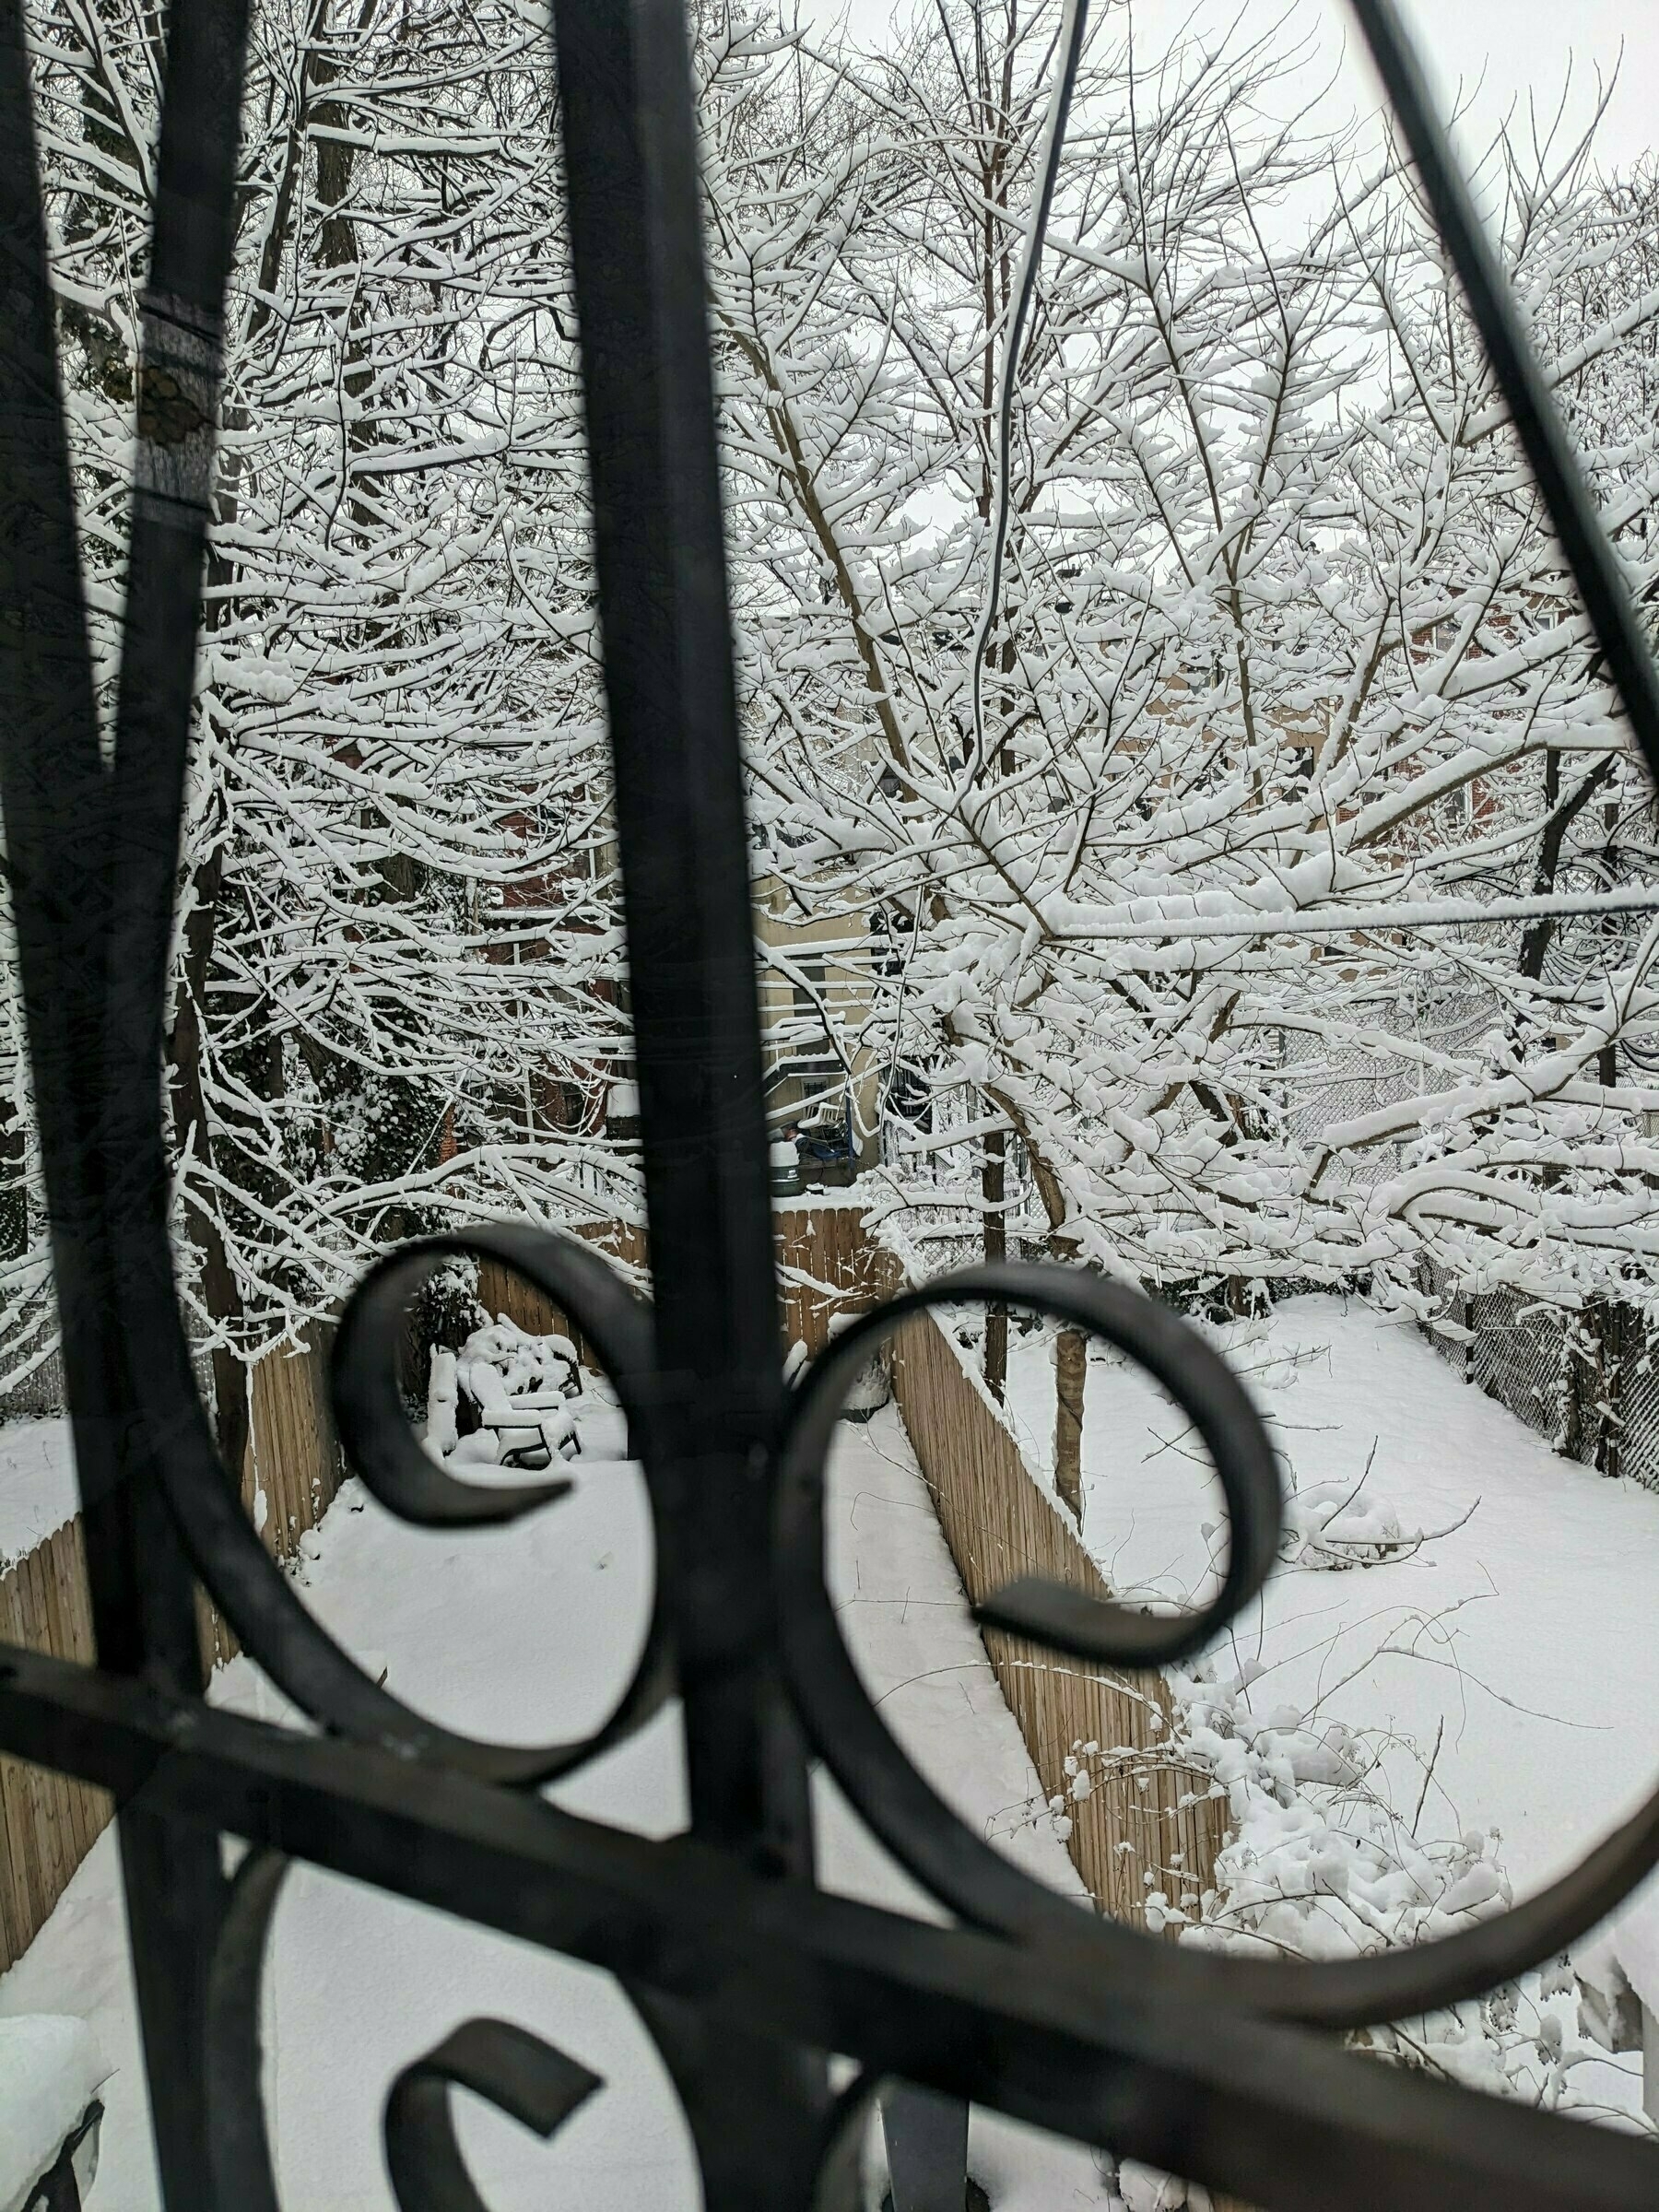 Snow-covered tree branches seen through a window with a grate